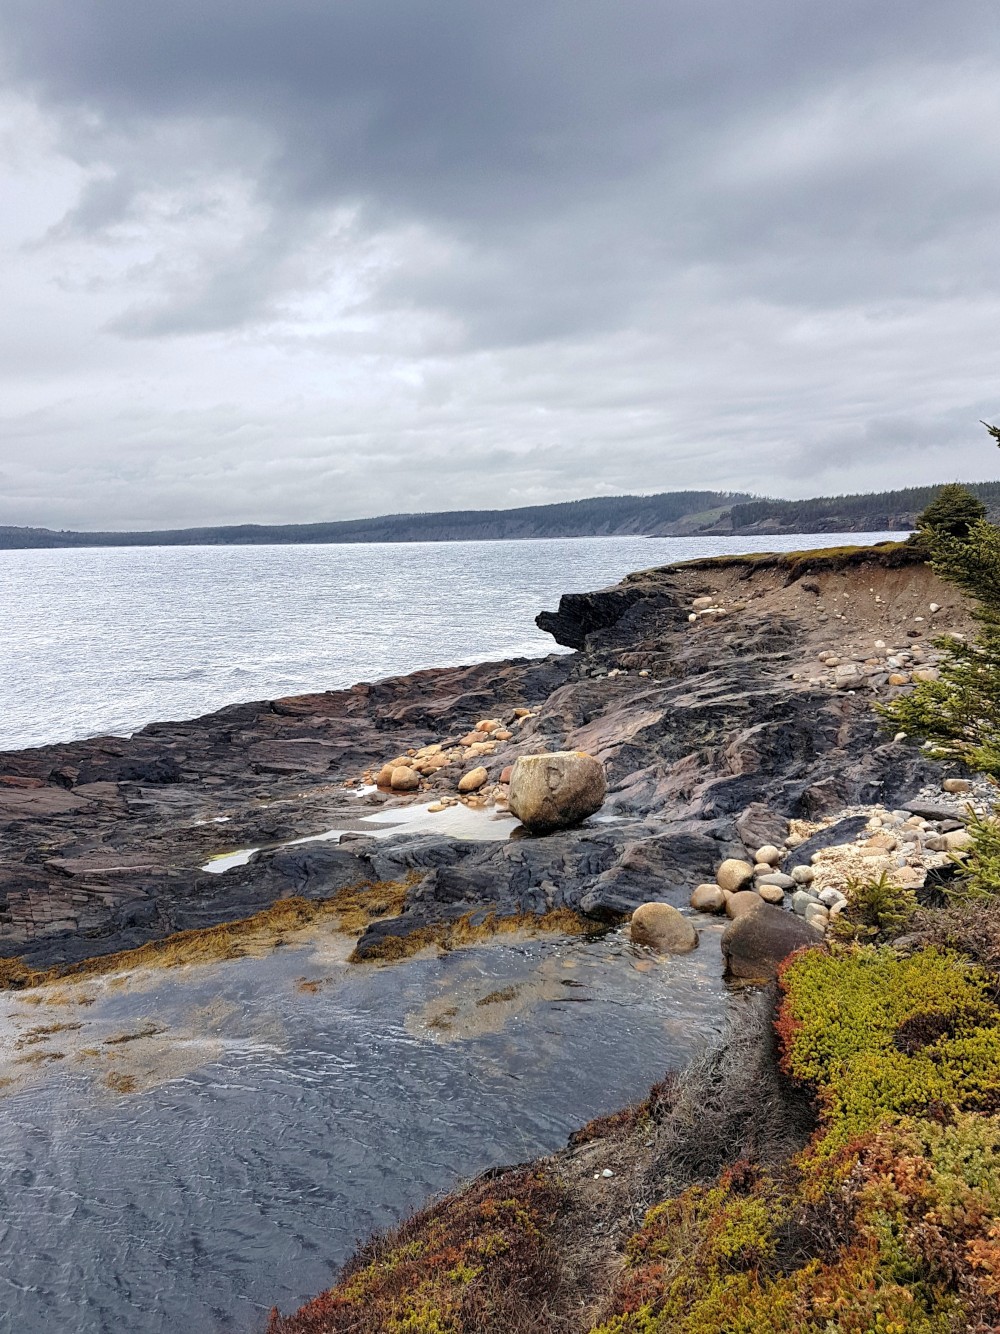 The Gaff Point hiking trail is one of the most scenic spots along the South Shore - Lighthouse Route in Nova Scotia.  The trail is on a gorgeous headland that juts out into the Atlantic Ocean.